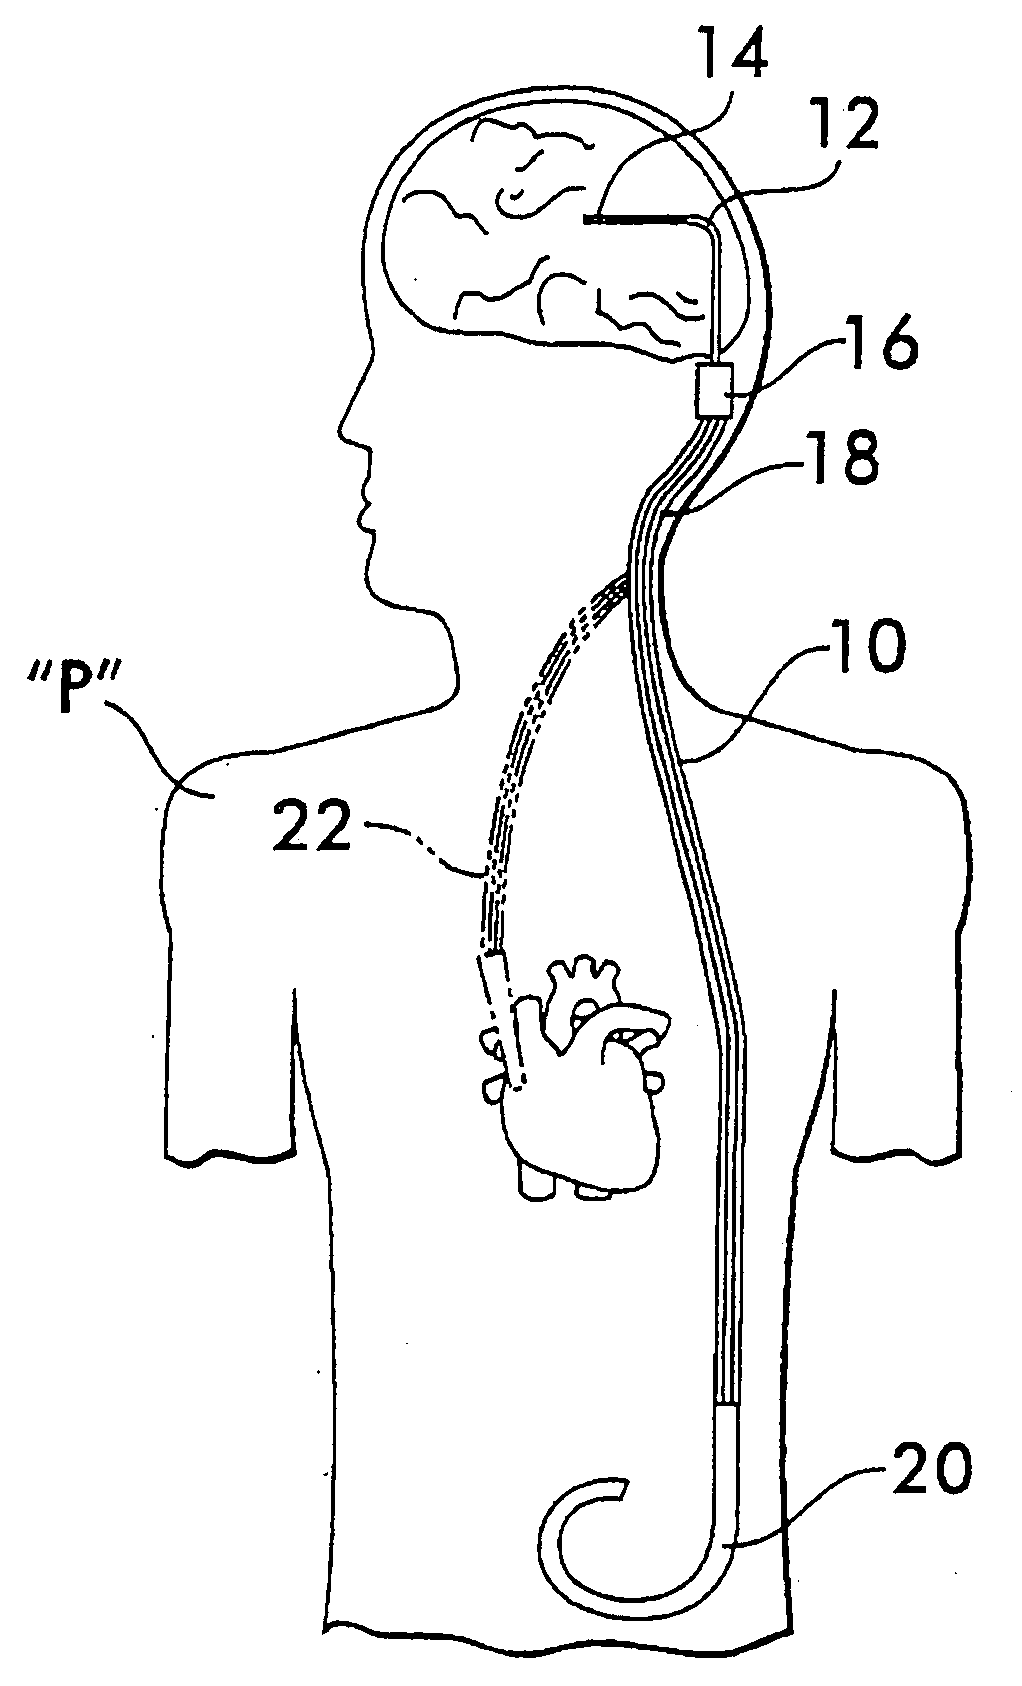 Implantable shunt or catheter enabling gradual delivery of therapeutic agents